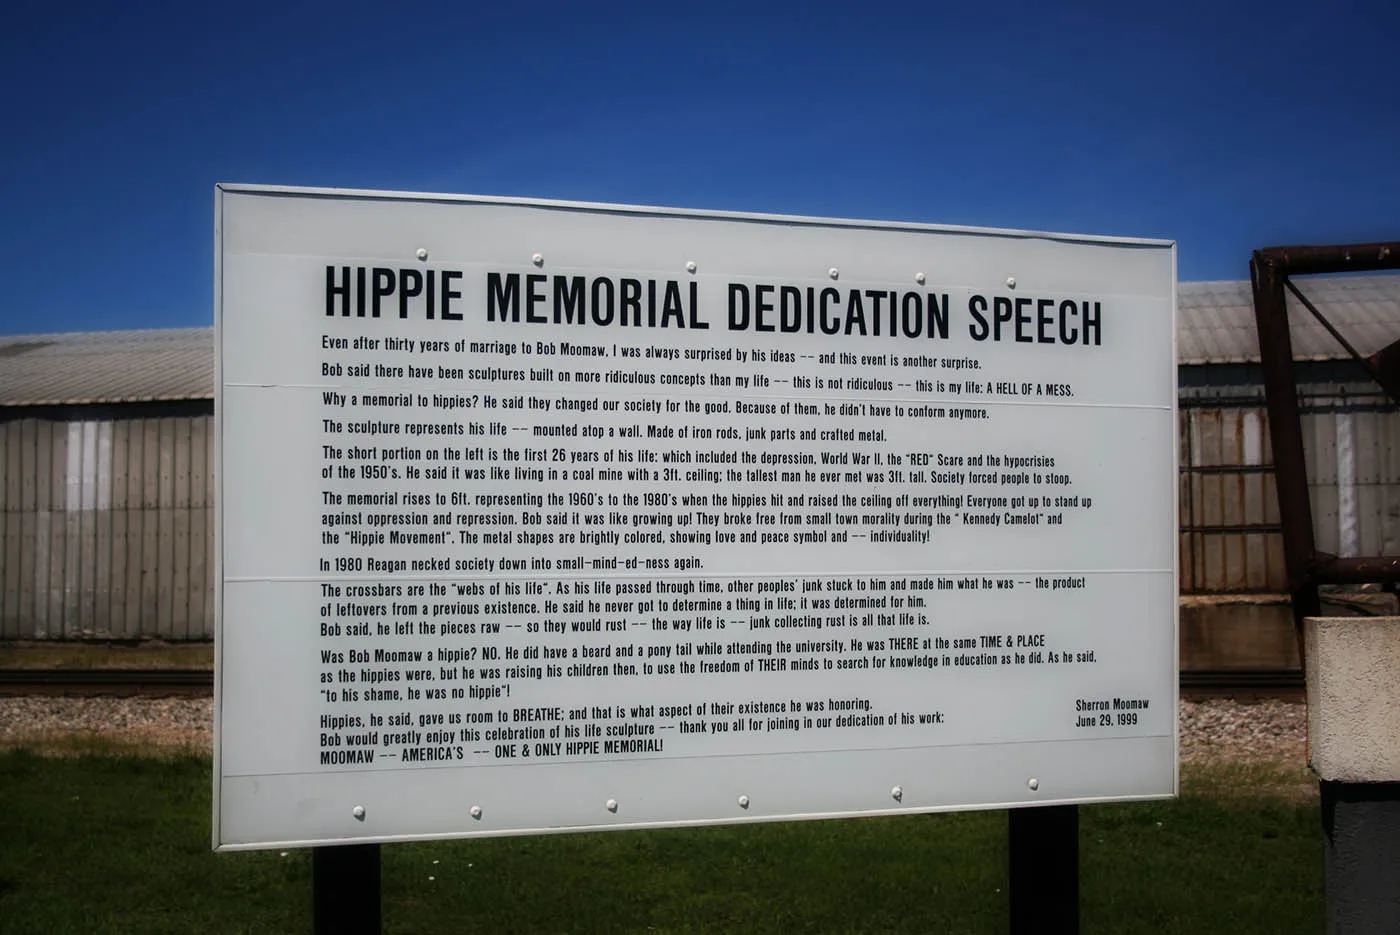 Moomaw America's Hippie Memorial, the one and only Hippie Memorial, a roadside attraction in Arcola, Illinois